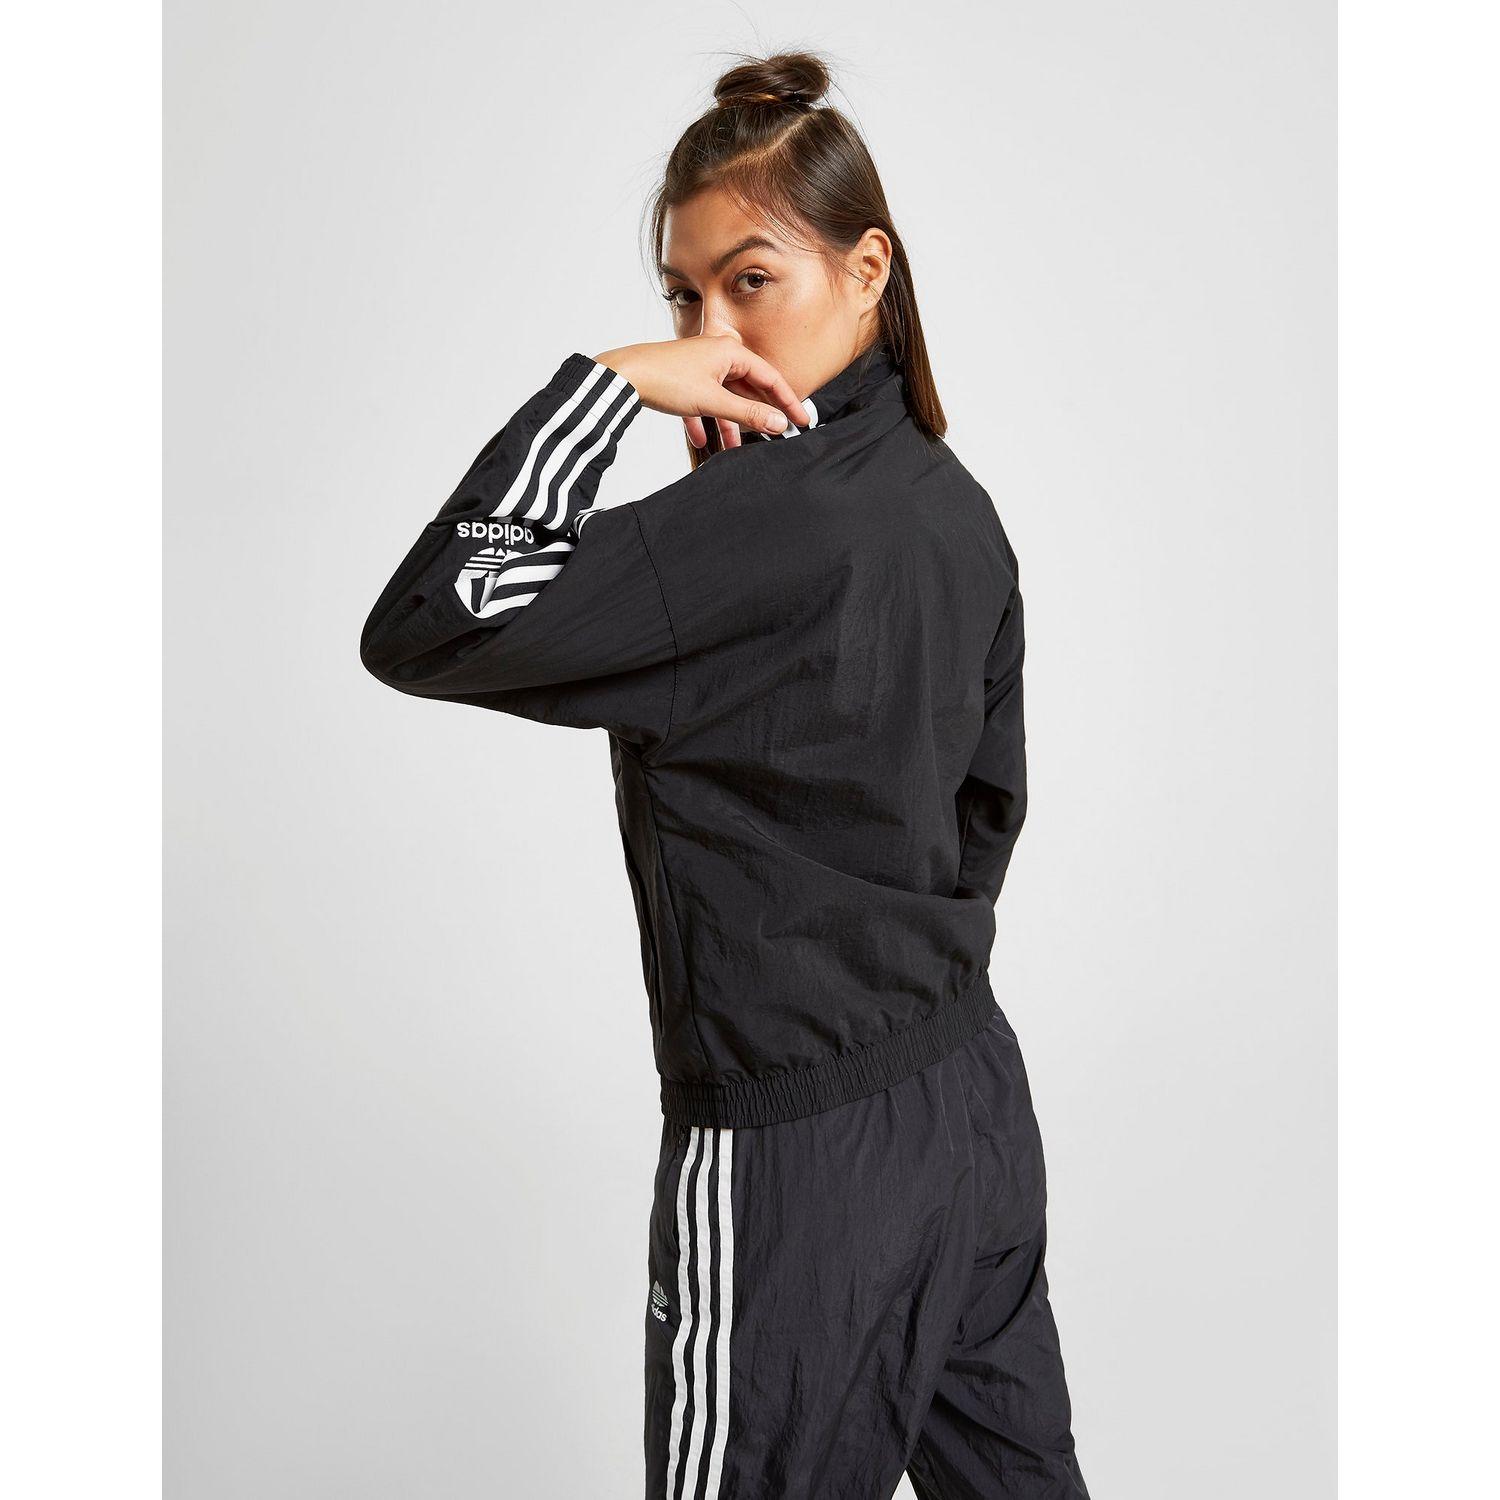 adidas Originals Synthetic 3-stripes Woven Lock Up Track Top in Black/White  (Black) - Lyst